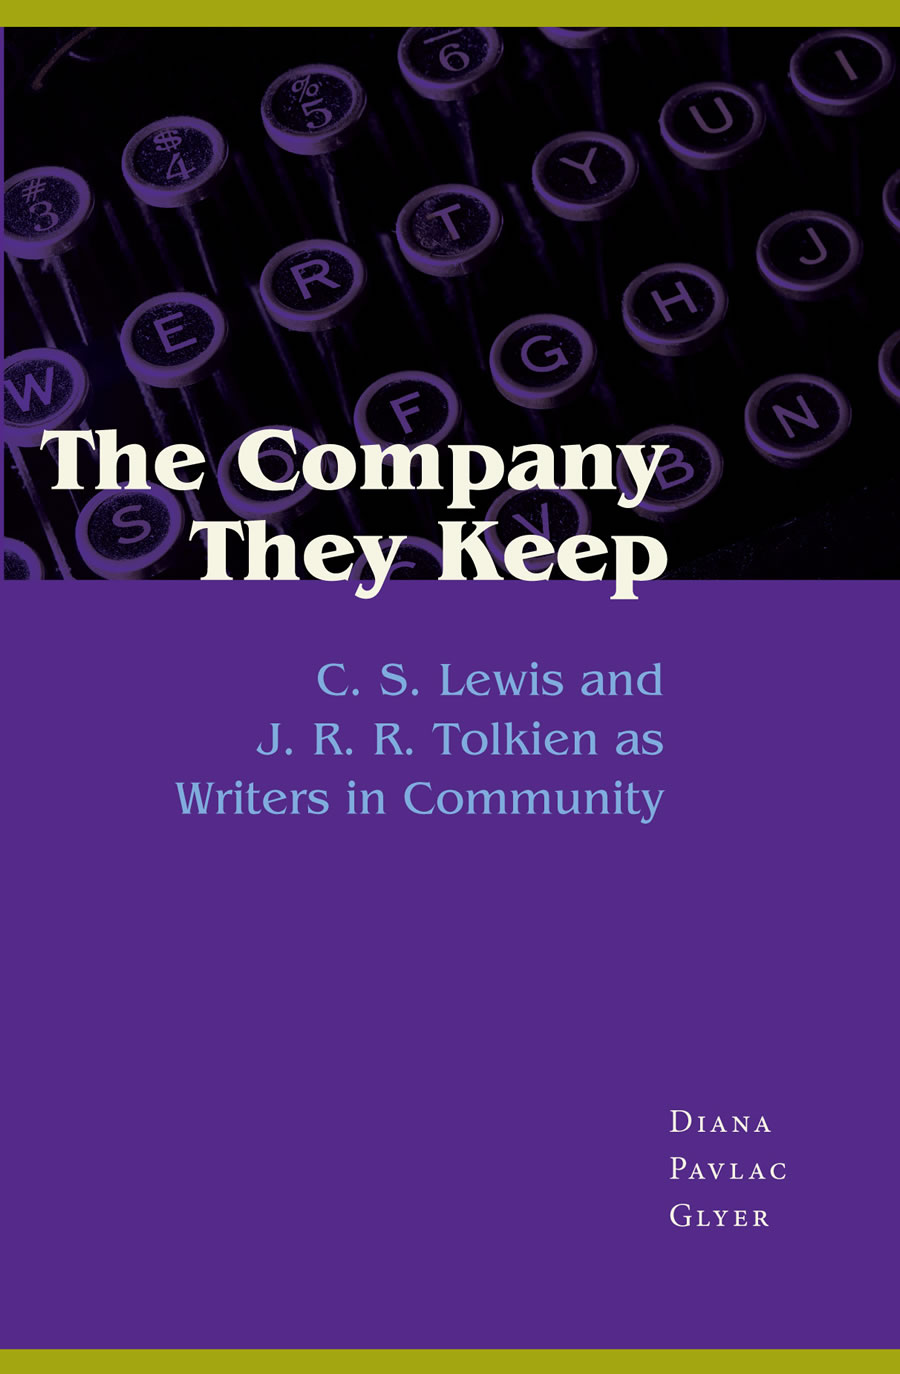 The Company They Keep: C. S. Lewis and J. R. R. Tolkien as Writers in Community second printing - paperback edition